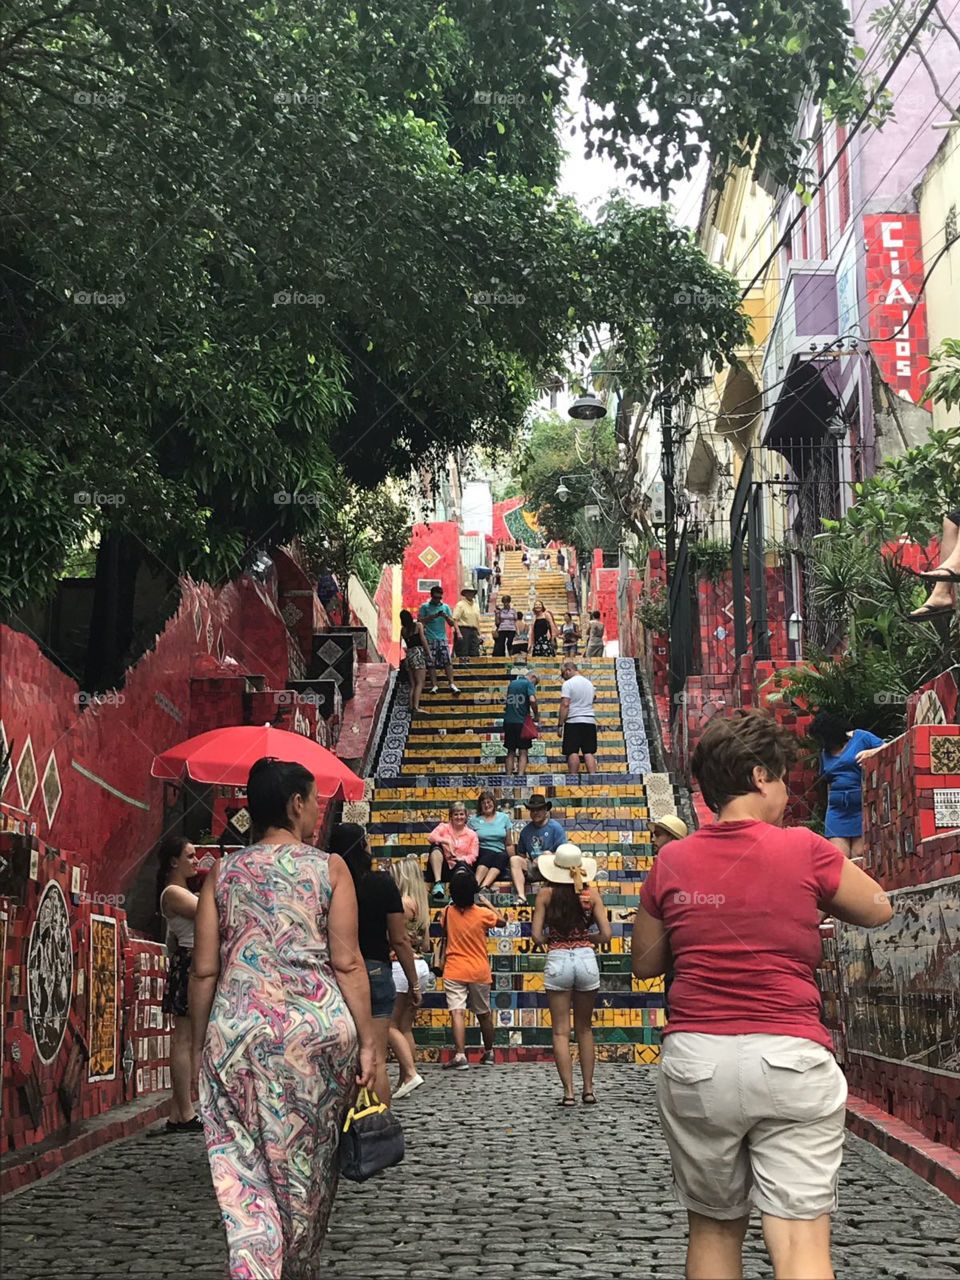 Famous stairs in Rio de Janeiro. Colourful street art made by a Brazilian artist.